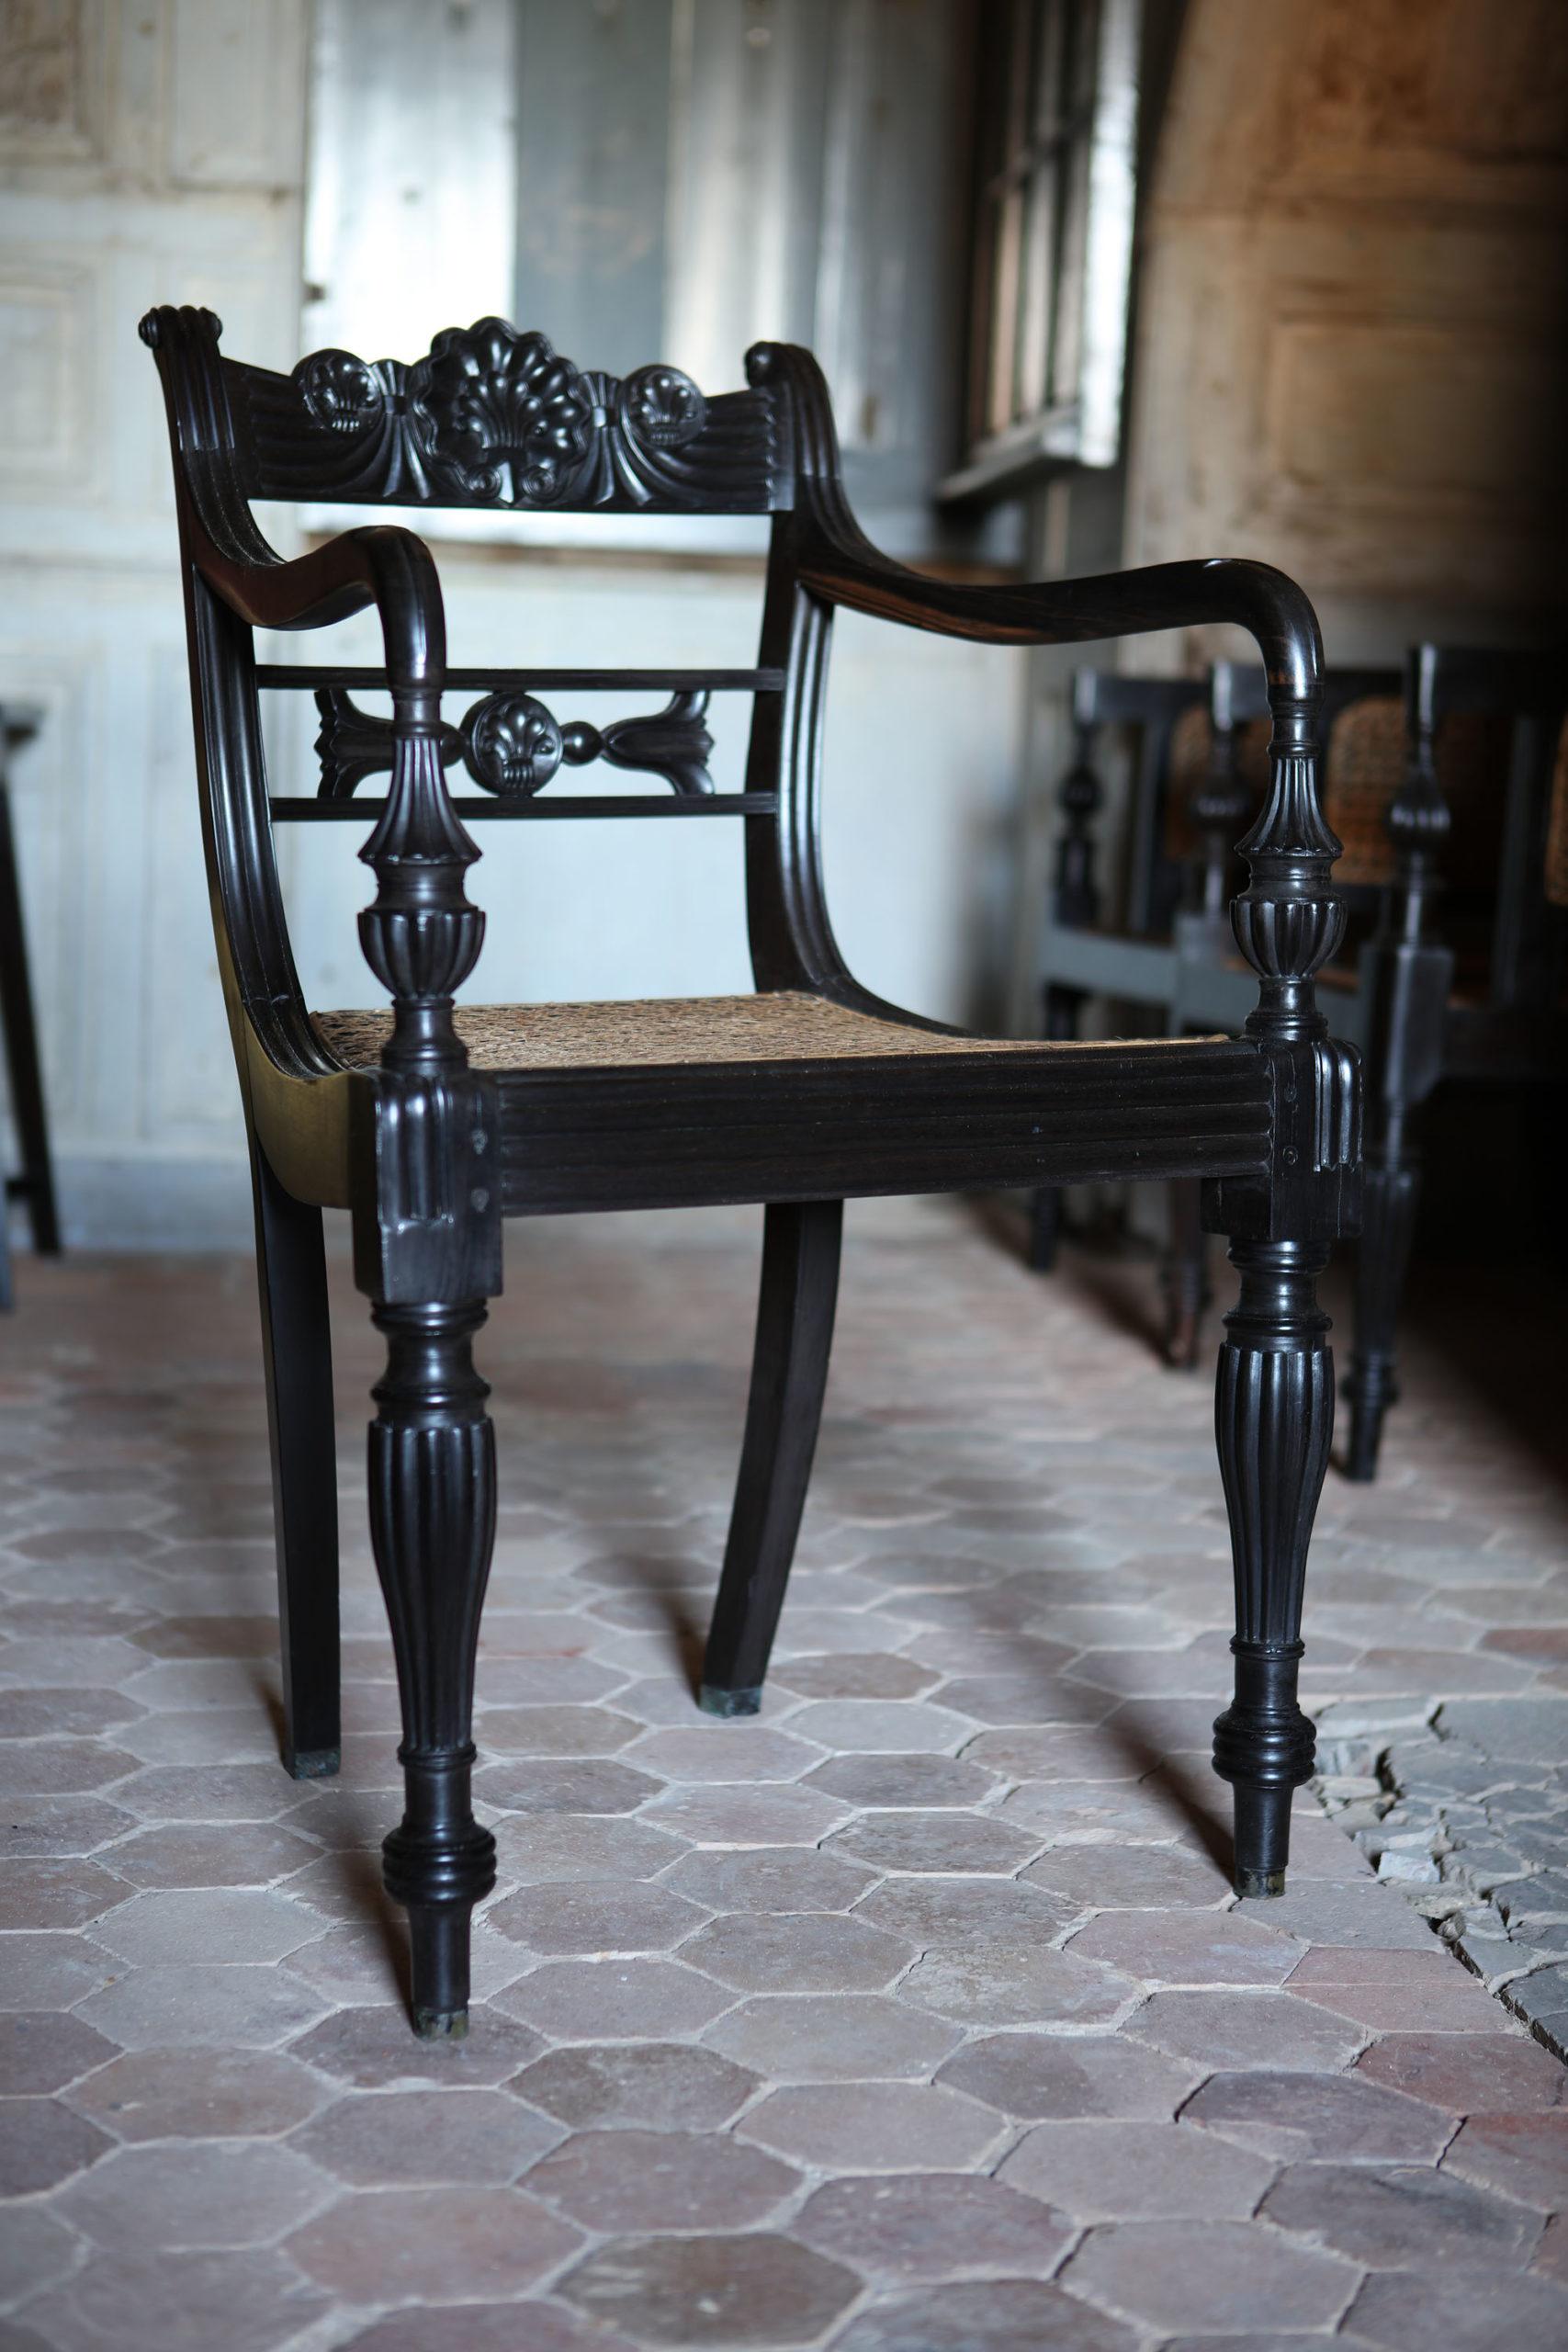 Set of Six 19th century Anglo-Indian Ebony Armchairs In Good Condition In London, by appointment only